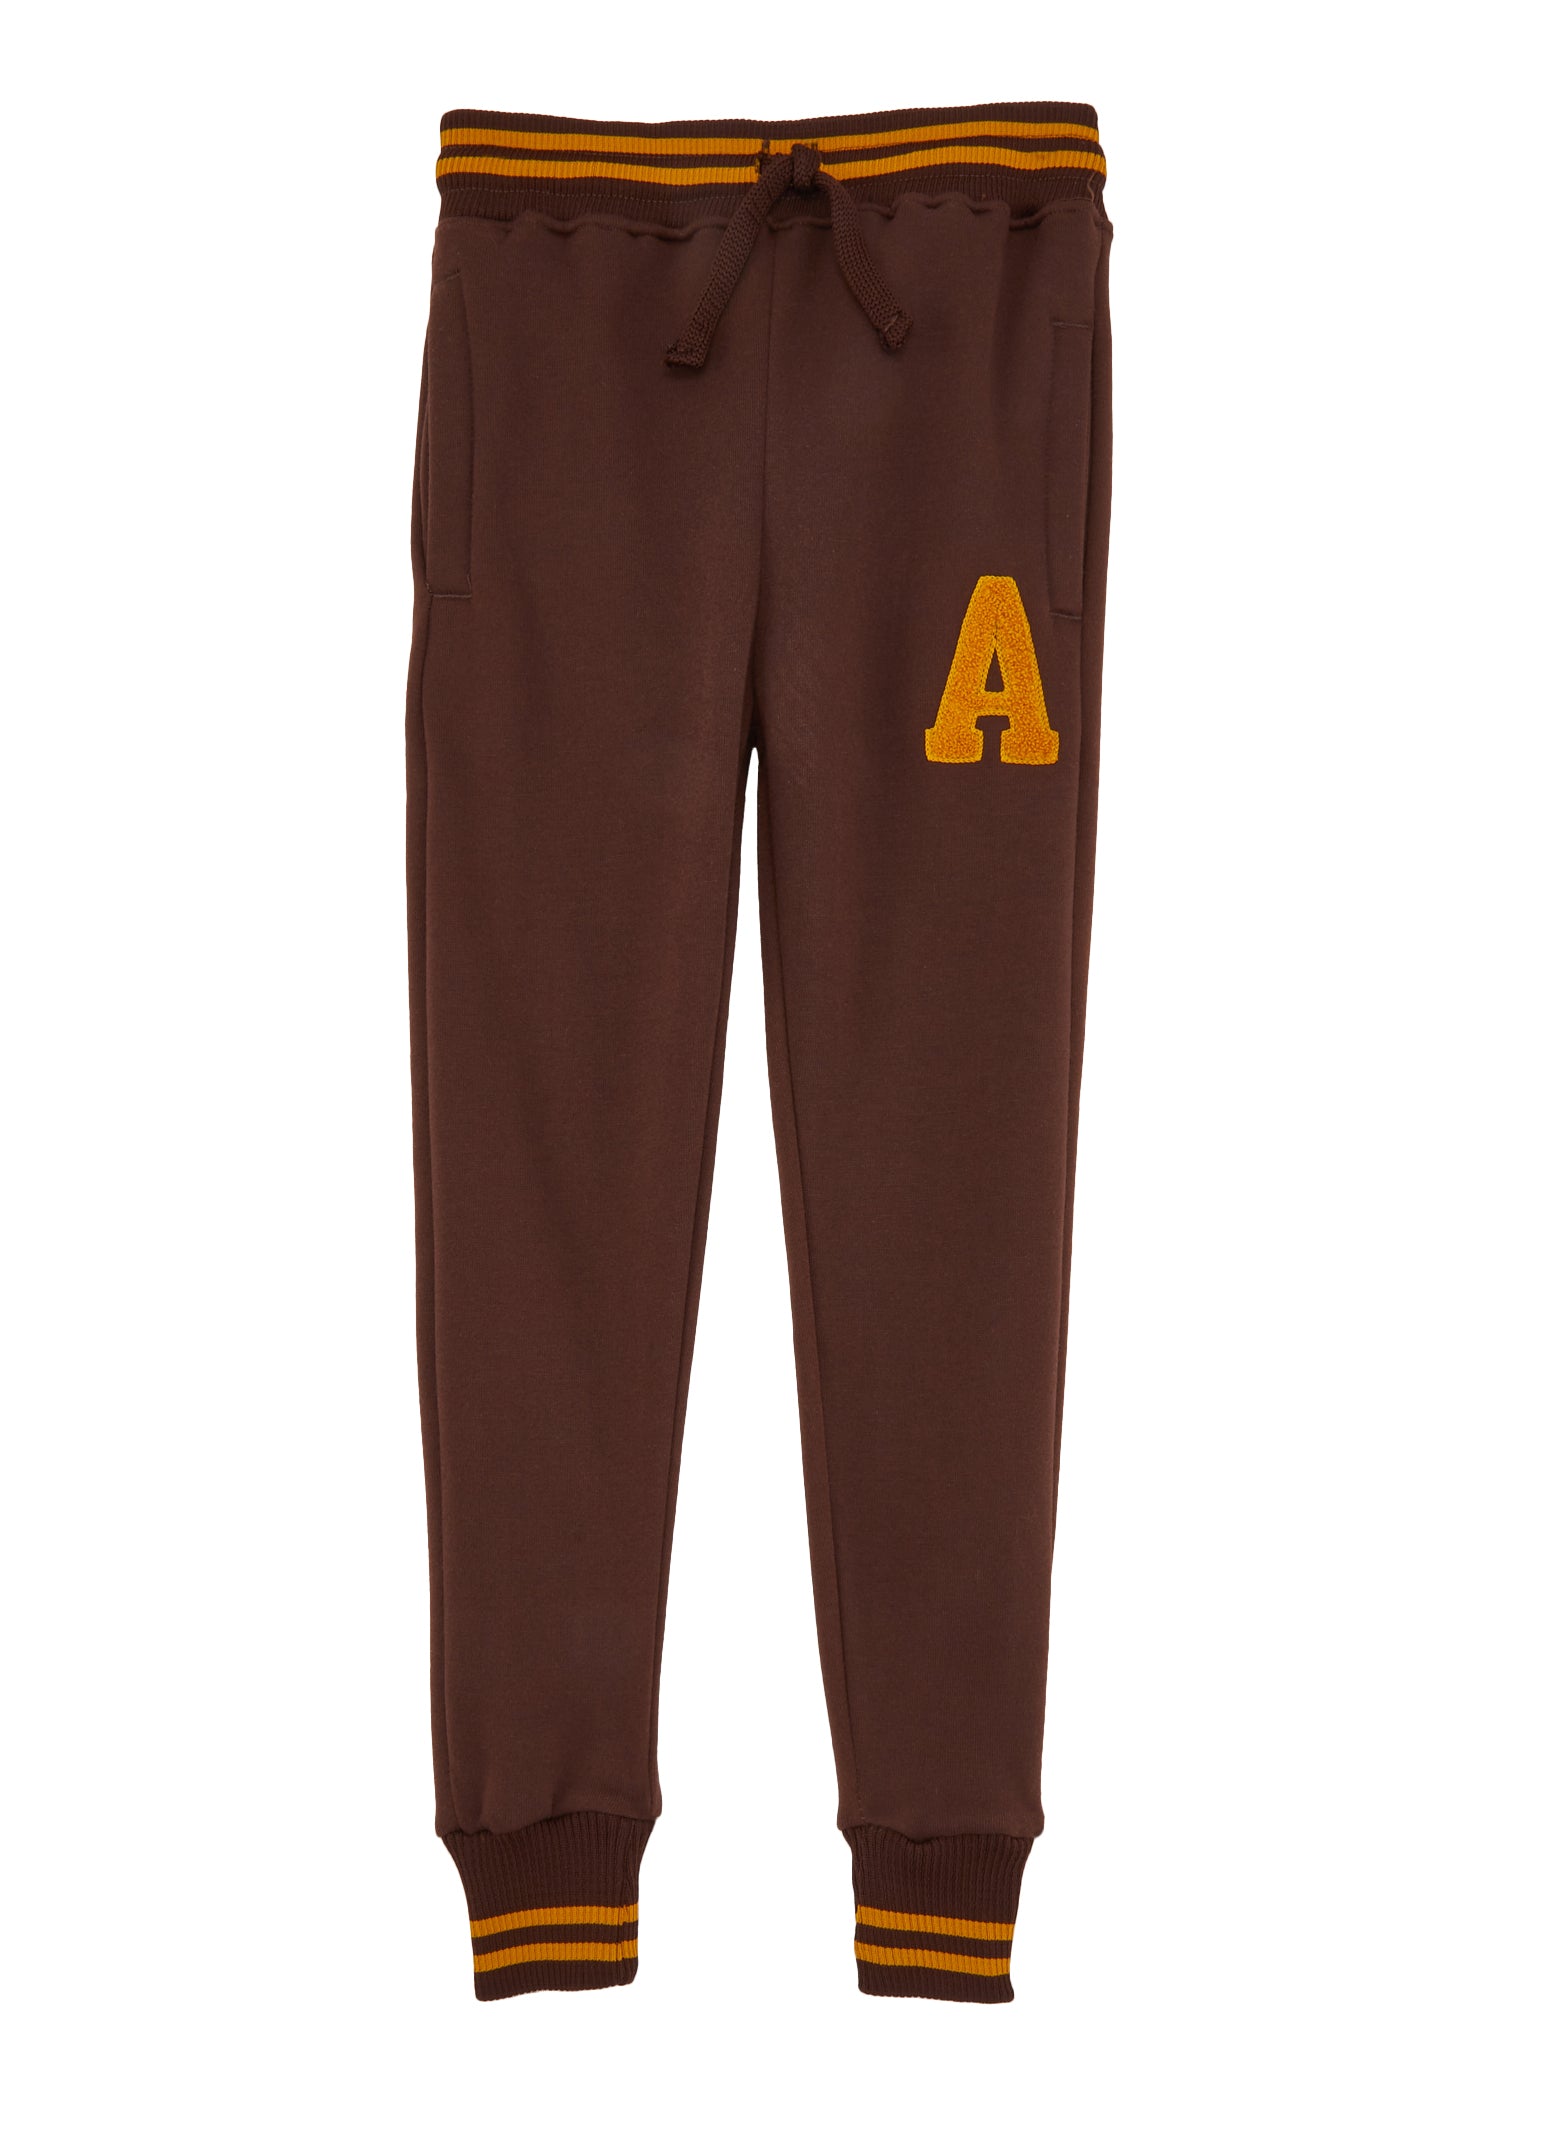 Boys A Initial Chenille Patch Joggers, Brown, Size 18